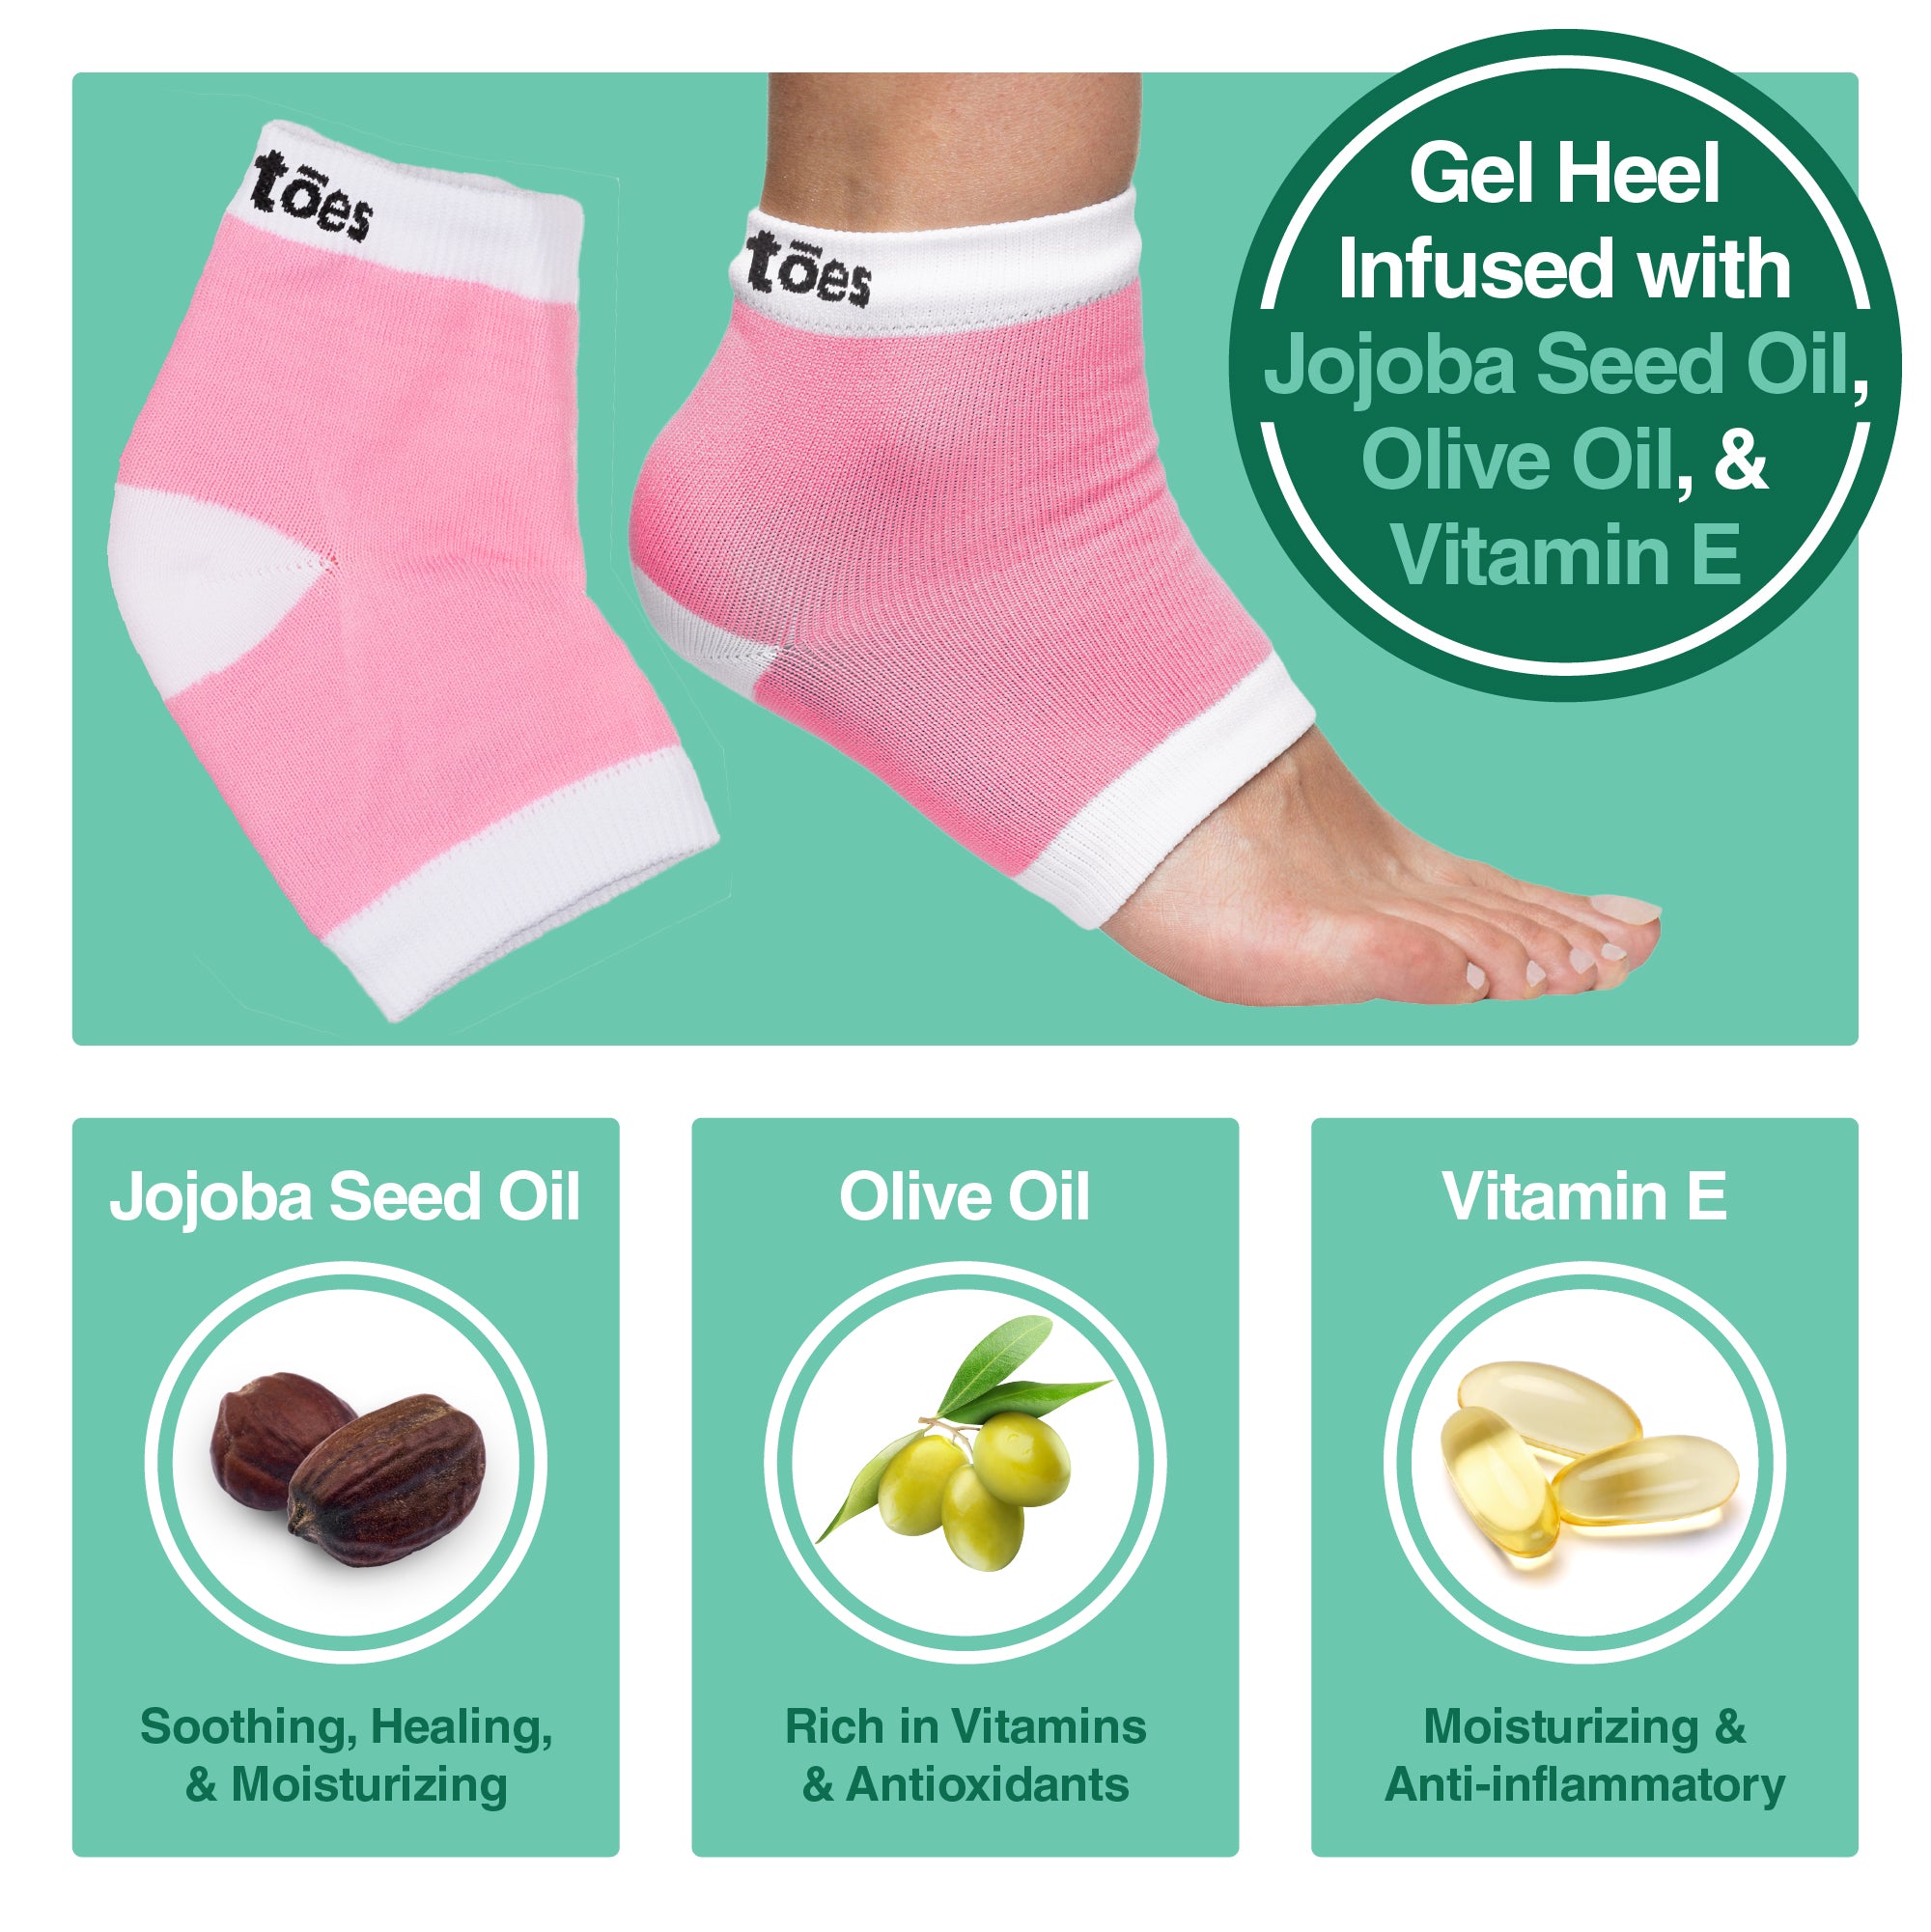  FootSmart Gel-Lined Compression Toe Separating Socks, Pair :  Beauty & Personal Care